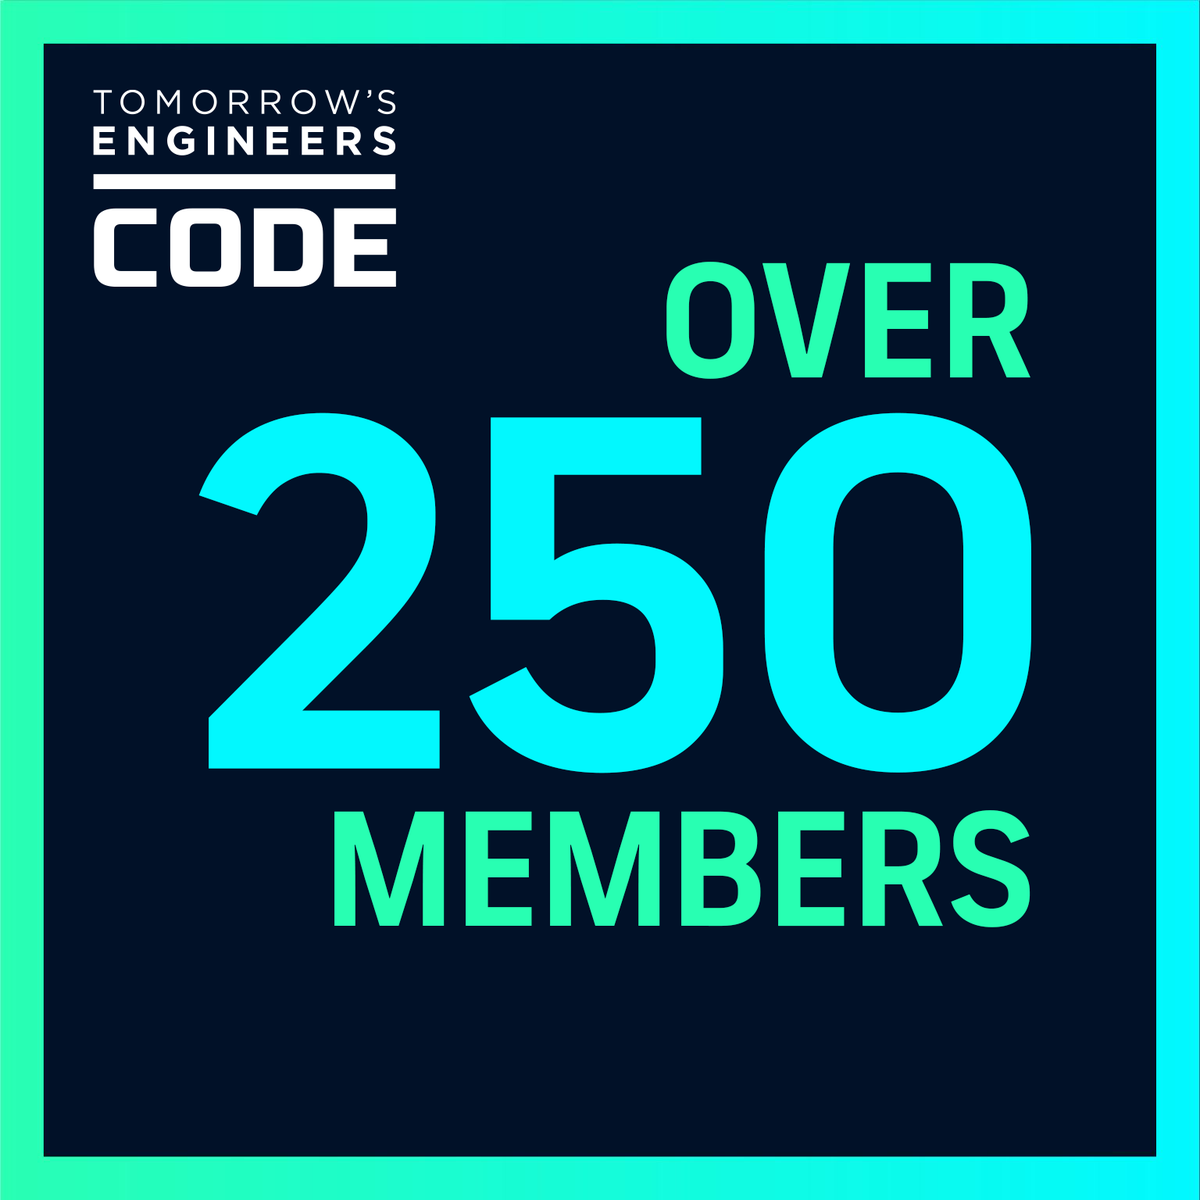 We're proud to be part of @TheTECode, a community committed to widening access to careers in #Technology & #Engineering.

As a sector with lots of exciting #Apprenticeships, supporting young people in this area is one of our main focuses #NAW2023 #TECode

bit.ly/3XNhBMS